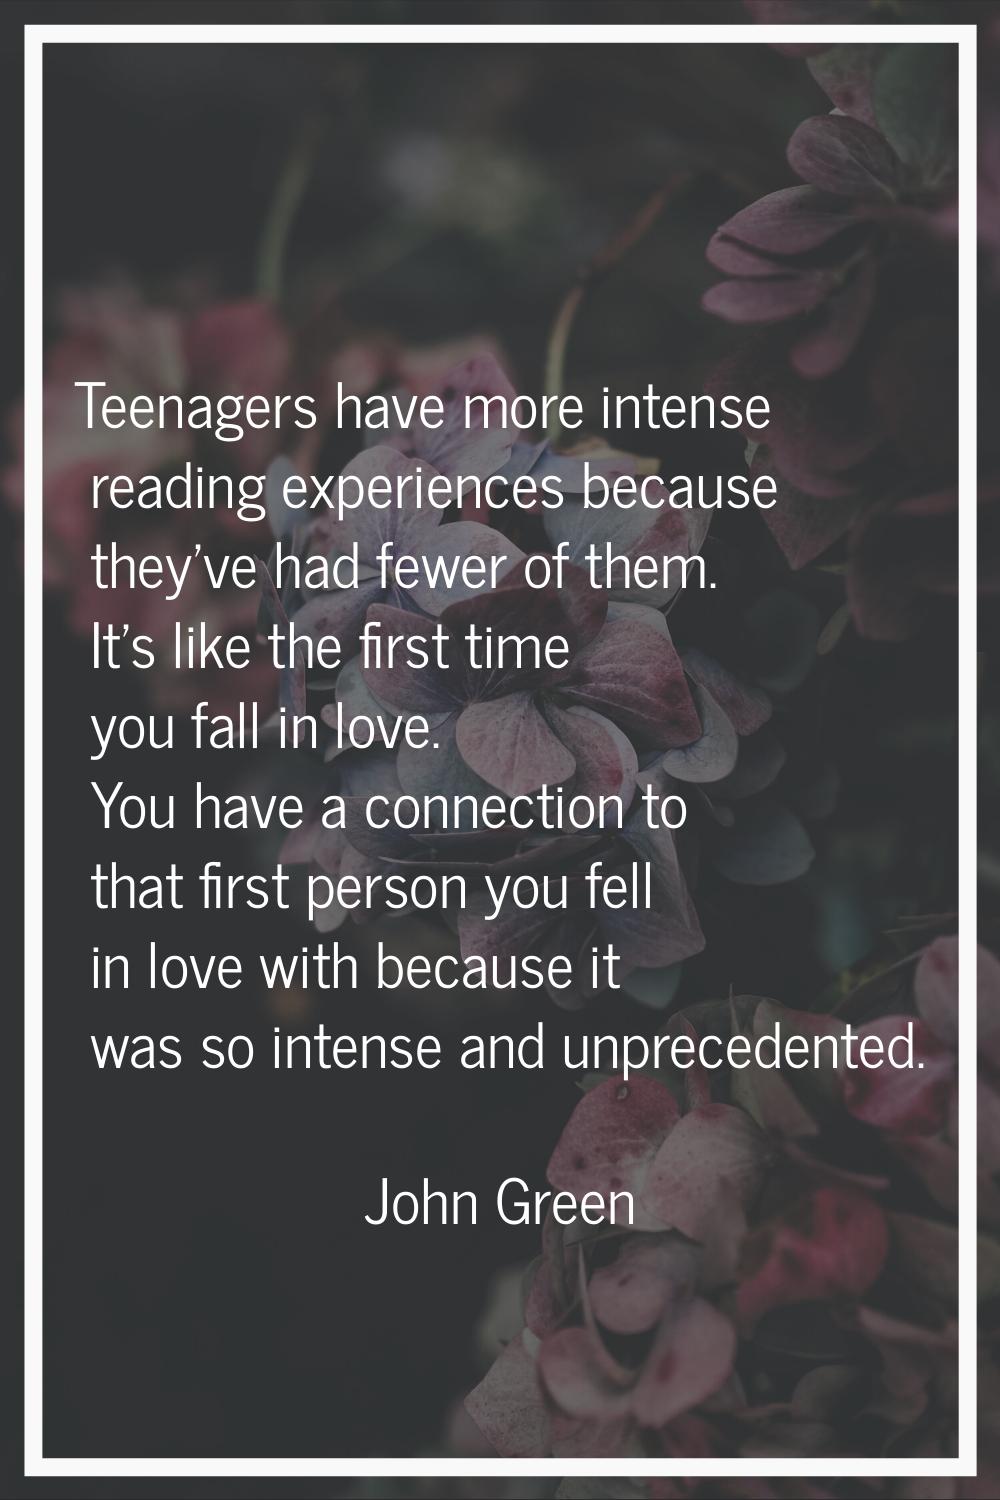 Teenagers have more intense reading experiences because they've had fewer of them. It's like the fi